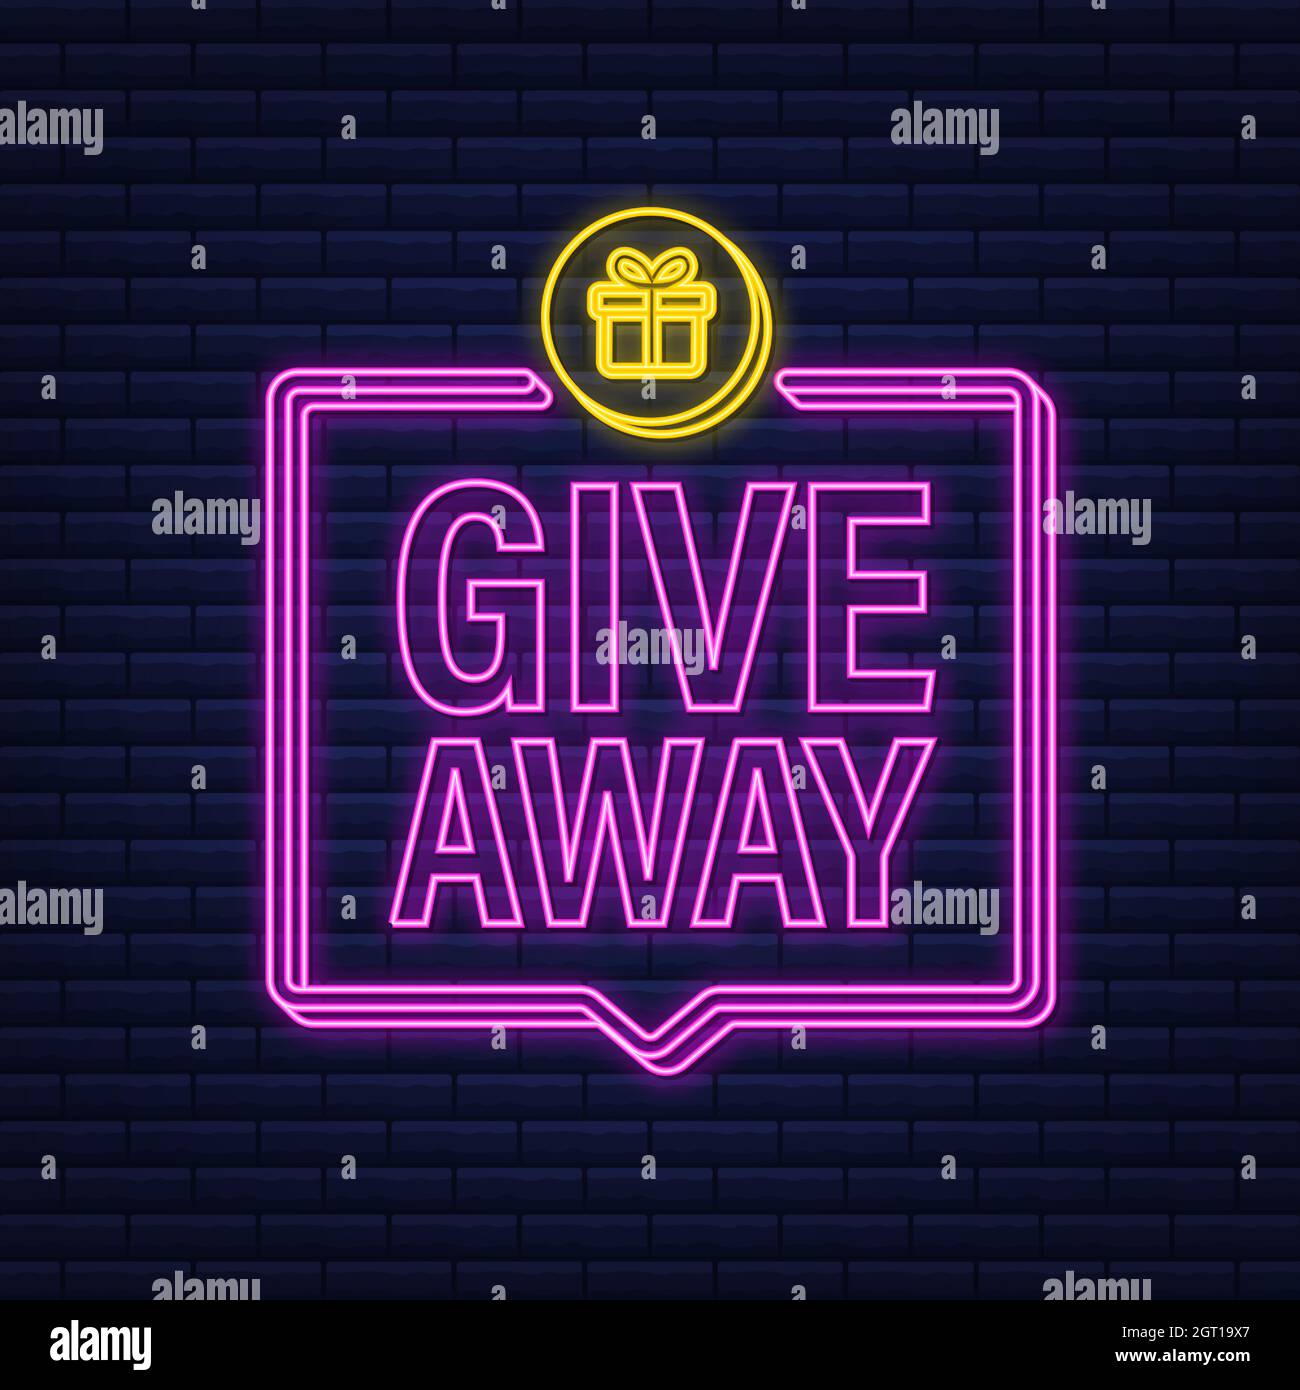 Social media contest giveaway and special offer Vector Image